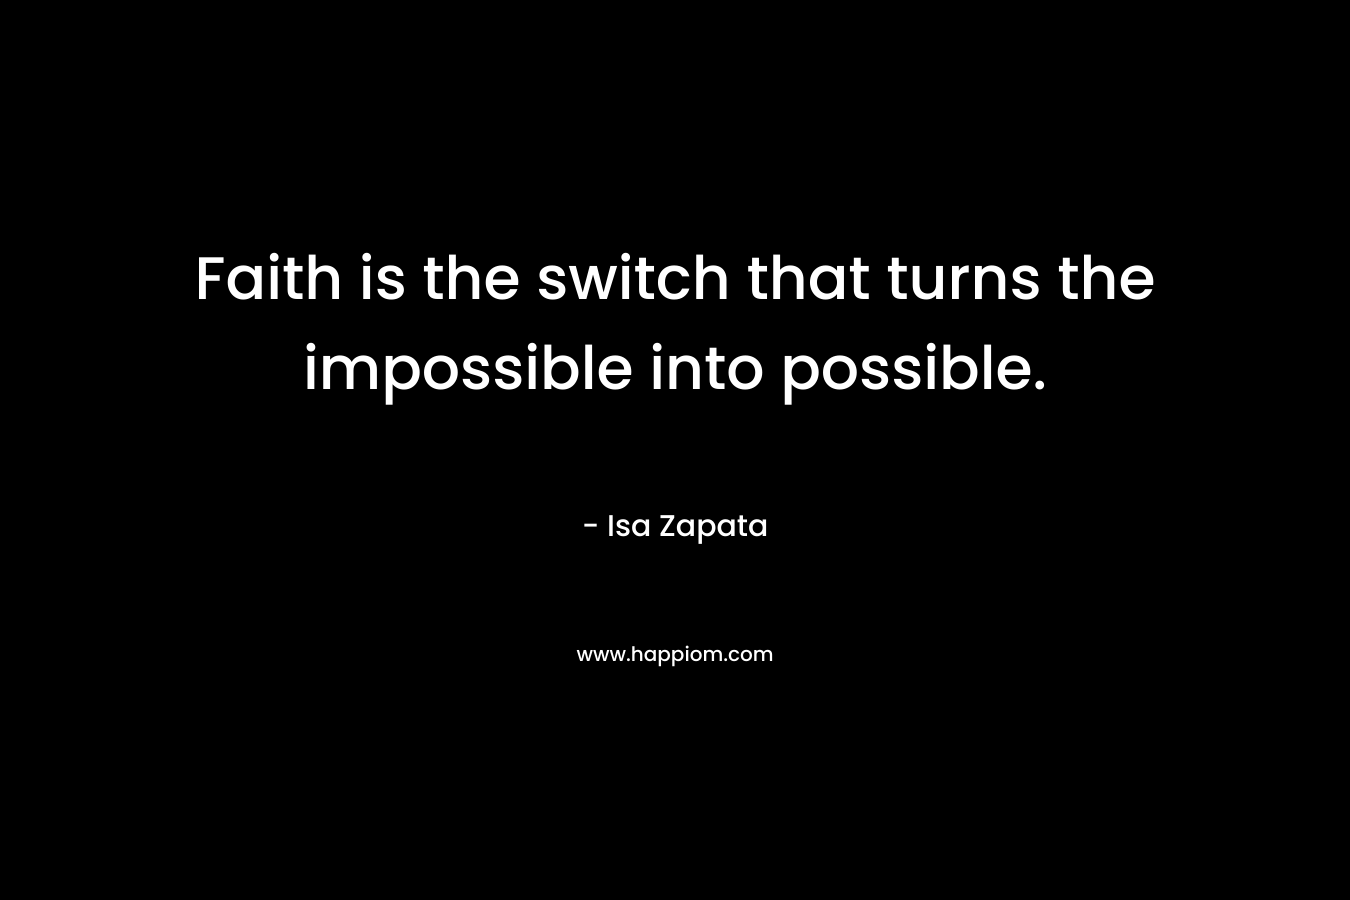 Faith is the switch that turns the impossible into possible.